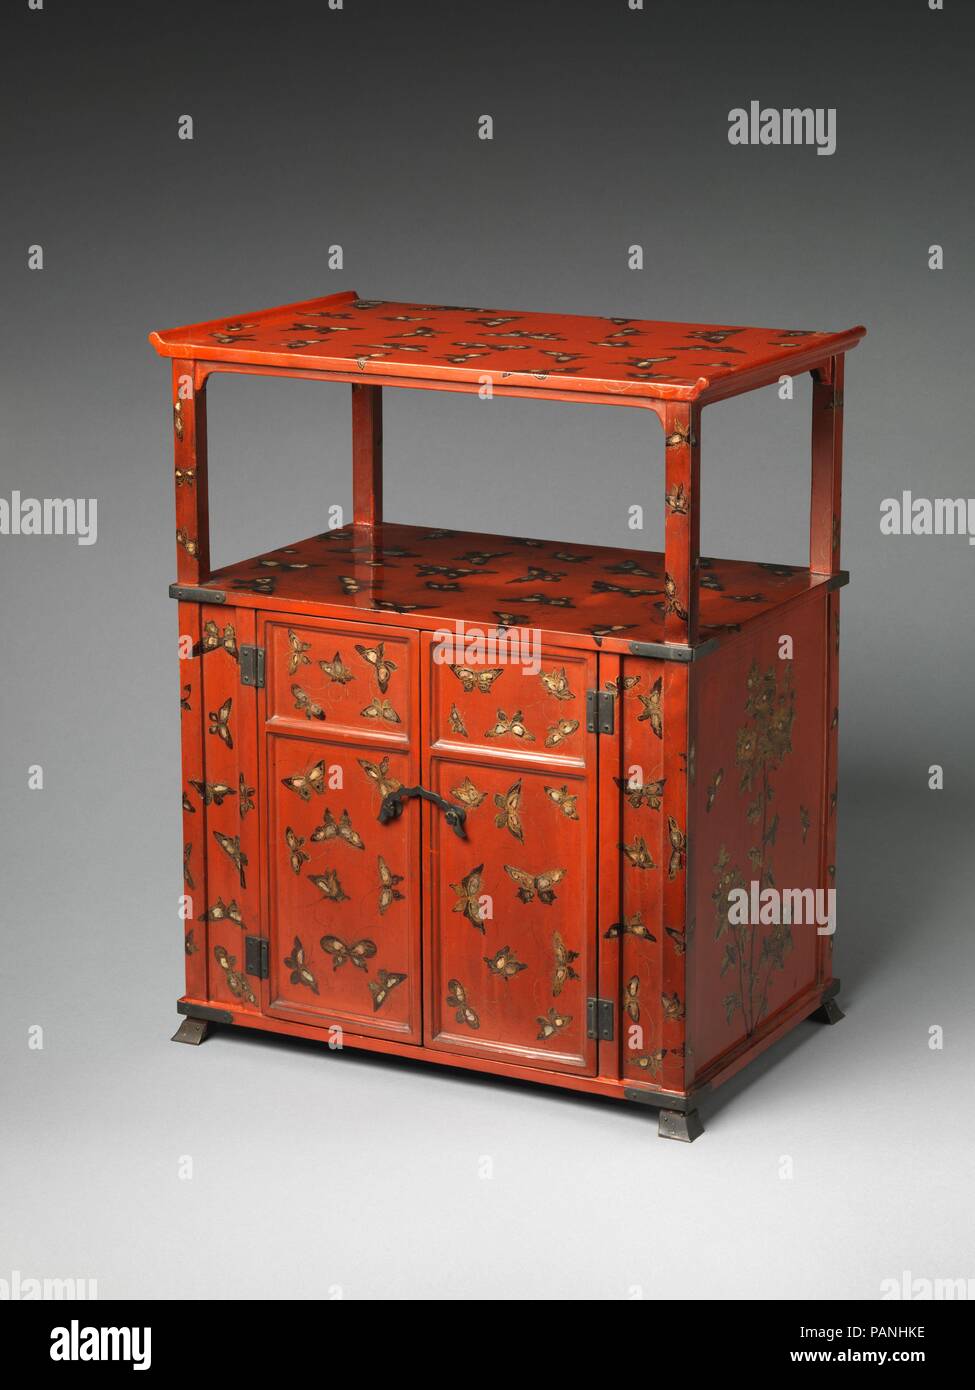 Cabinet with Design of Butterflies. Culture: Japan (Ryukyu Islands). Dimensions: H. 20 1/8 in. (51.1 cm); W. 16 1/2 in. (41.9 cm); D. 10 3/8 in. (26.4 cm). Date: 18th century.  Butterflies and flowers are often found in the visual arts of China and the Ryukyu Islands in the eighteenth century. The butterflies decorating this cabinet were painted in black and gold lacquer and inlaid with pearl shell. The overall shape of the cabinet and the four small feet show parallels to Japanese art. A large opening in the shape of a swastika in the cabinet's back wall suggests that it was once used to hous Stock Photo